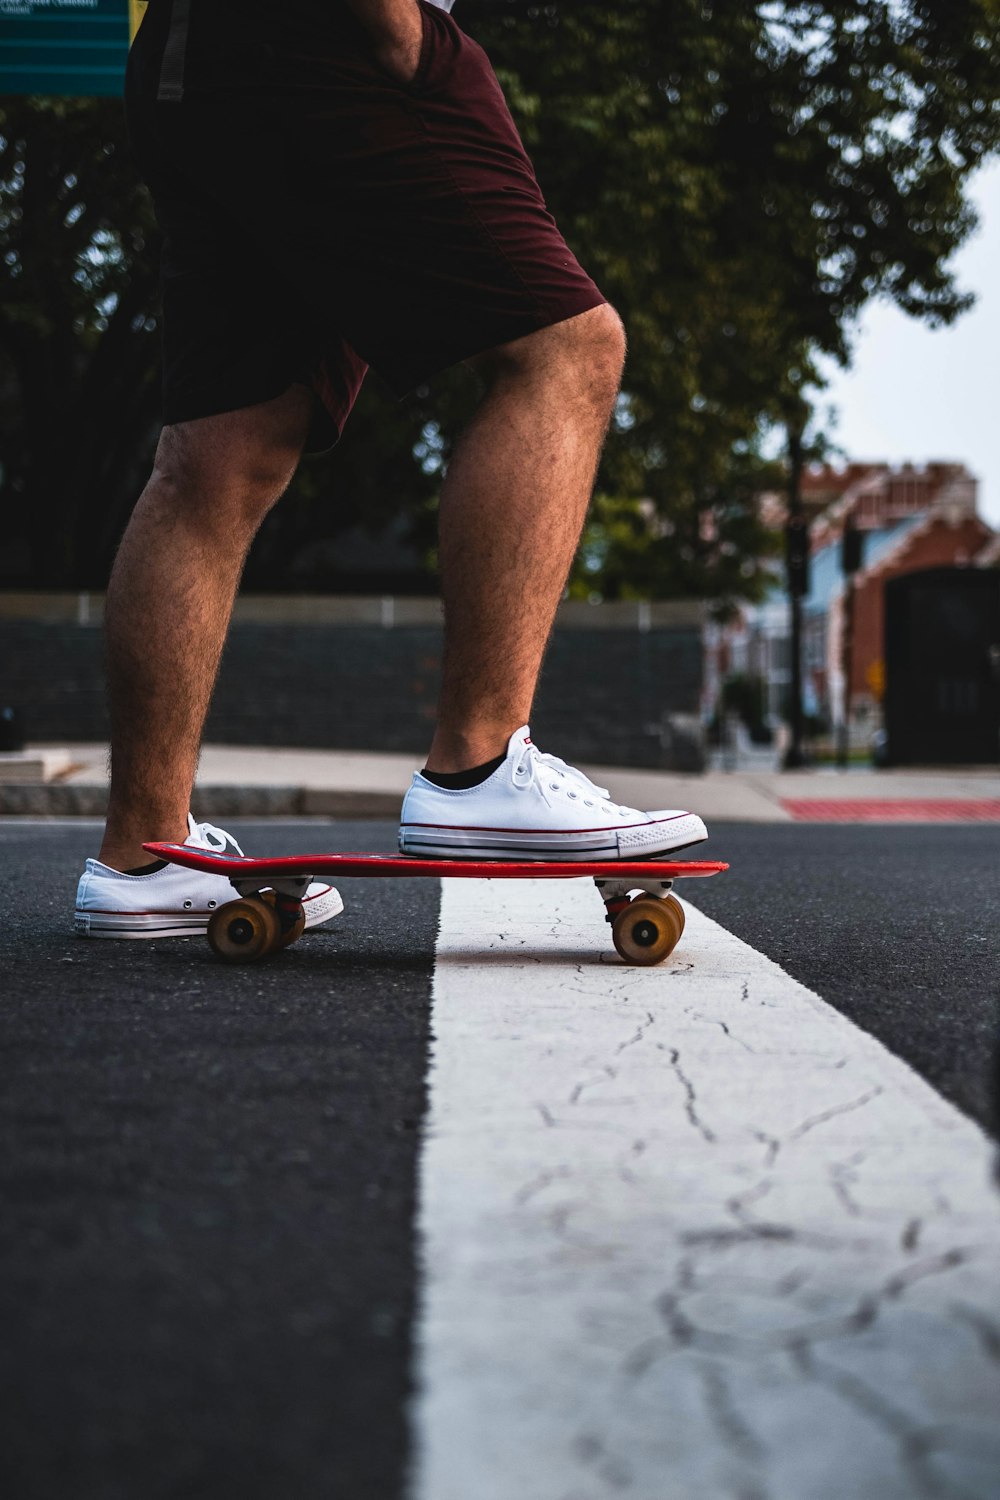 person in white and red nike sneakers riding orange skateboard